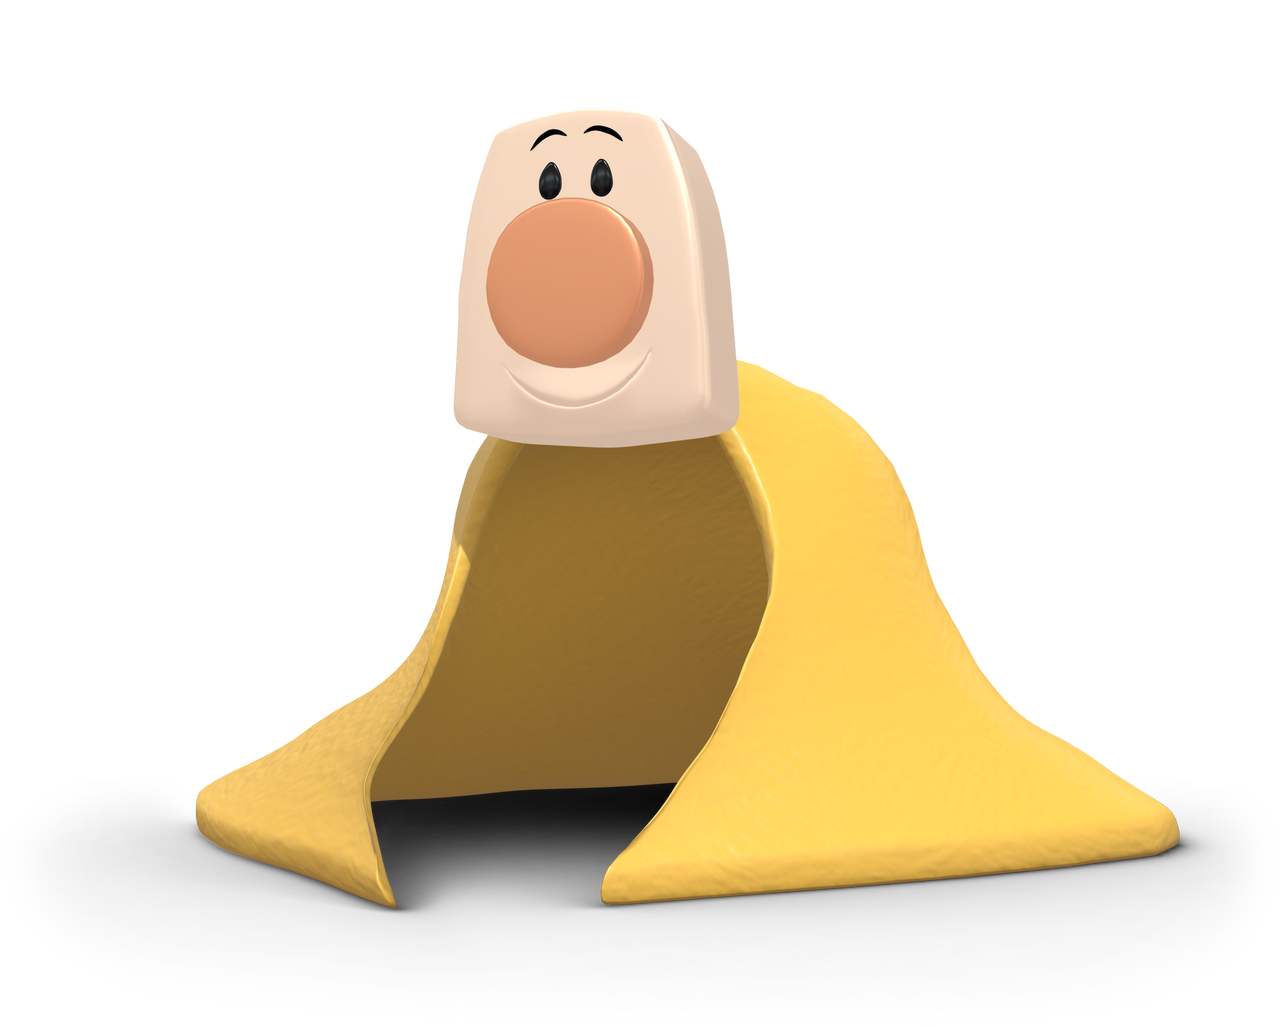 _the_brave_little_toaster__blanky_render_by_fawfulthegreat64_dfagm4a-fullview.png